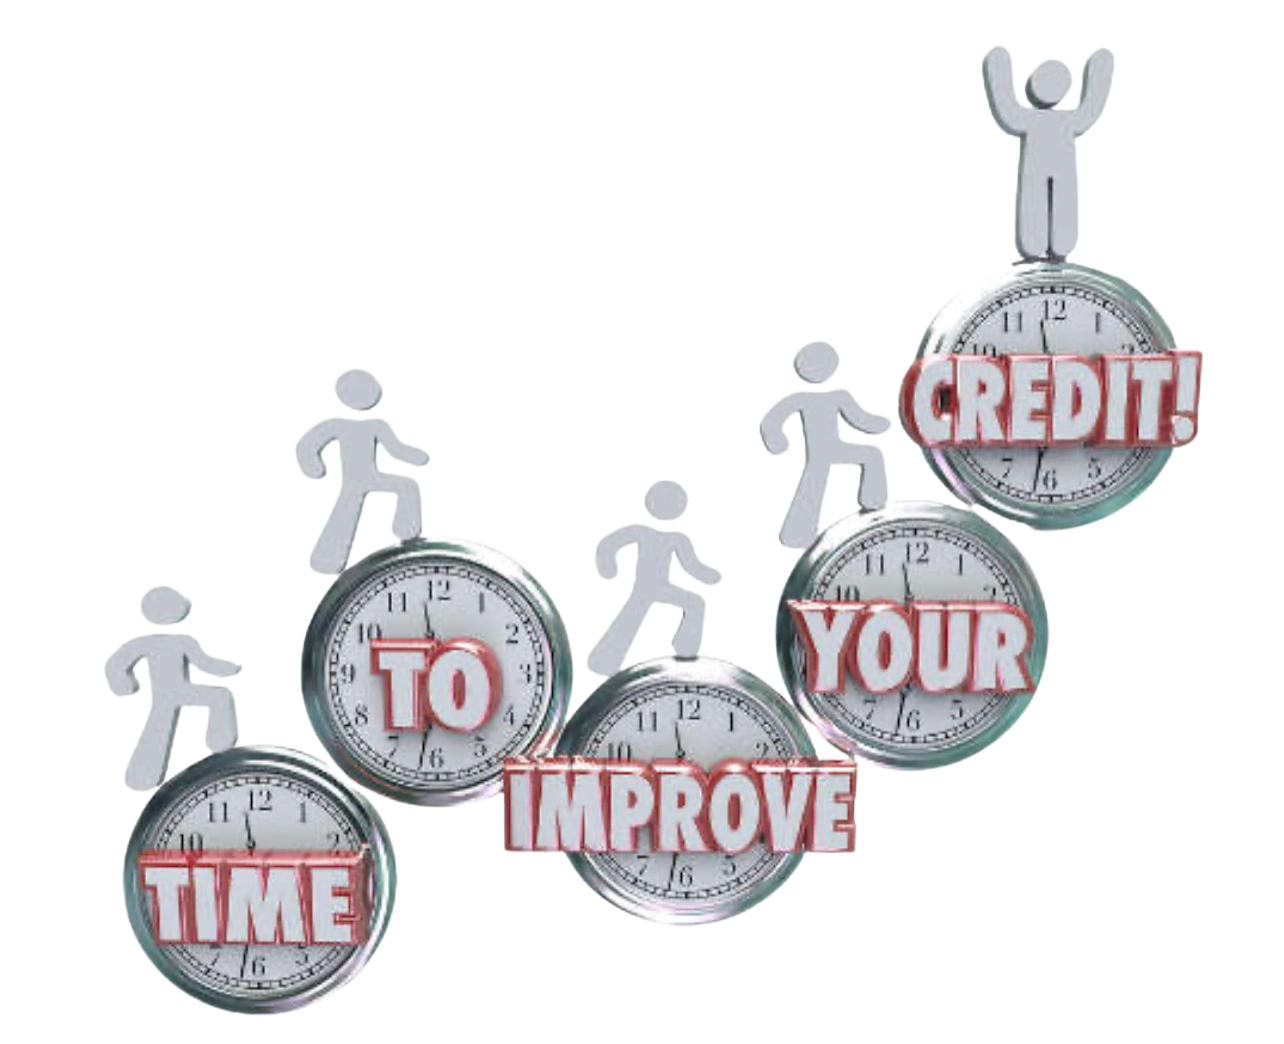 Created to be more coaching and consulting credit repair/restoration services.